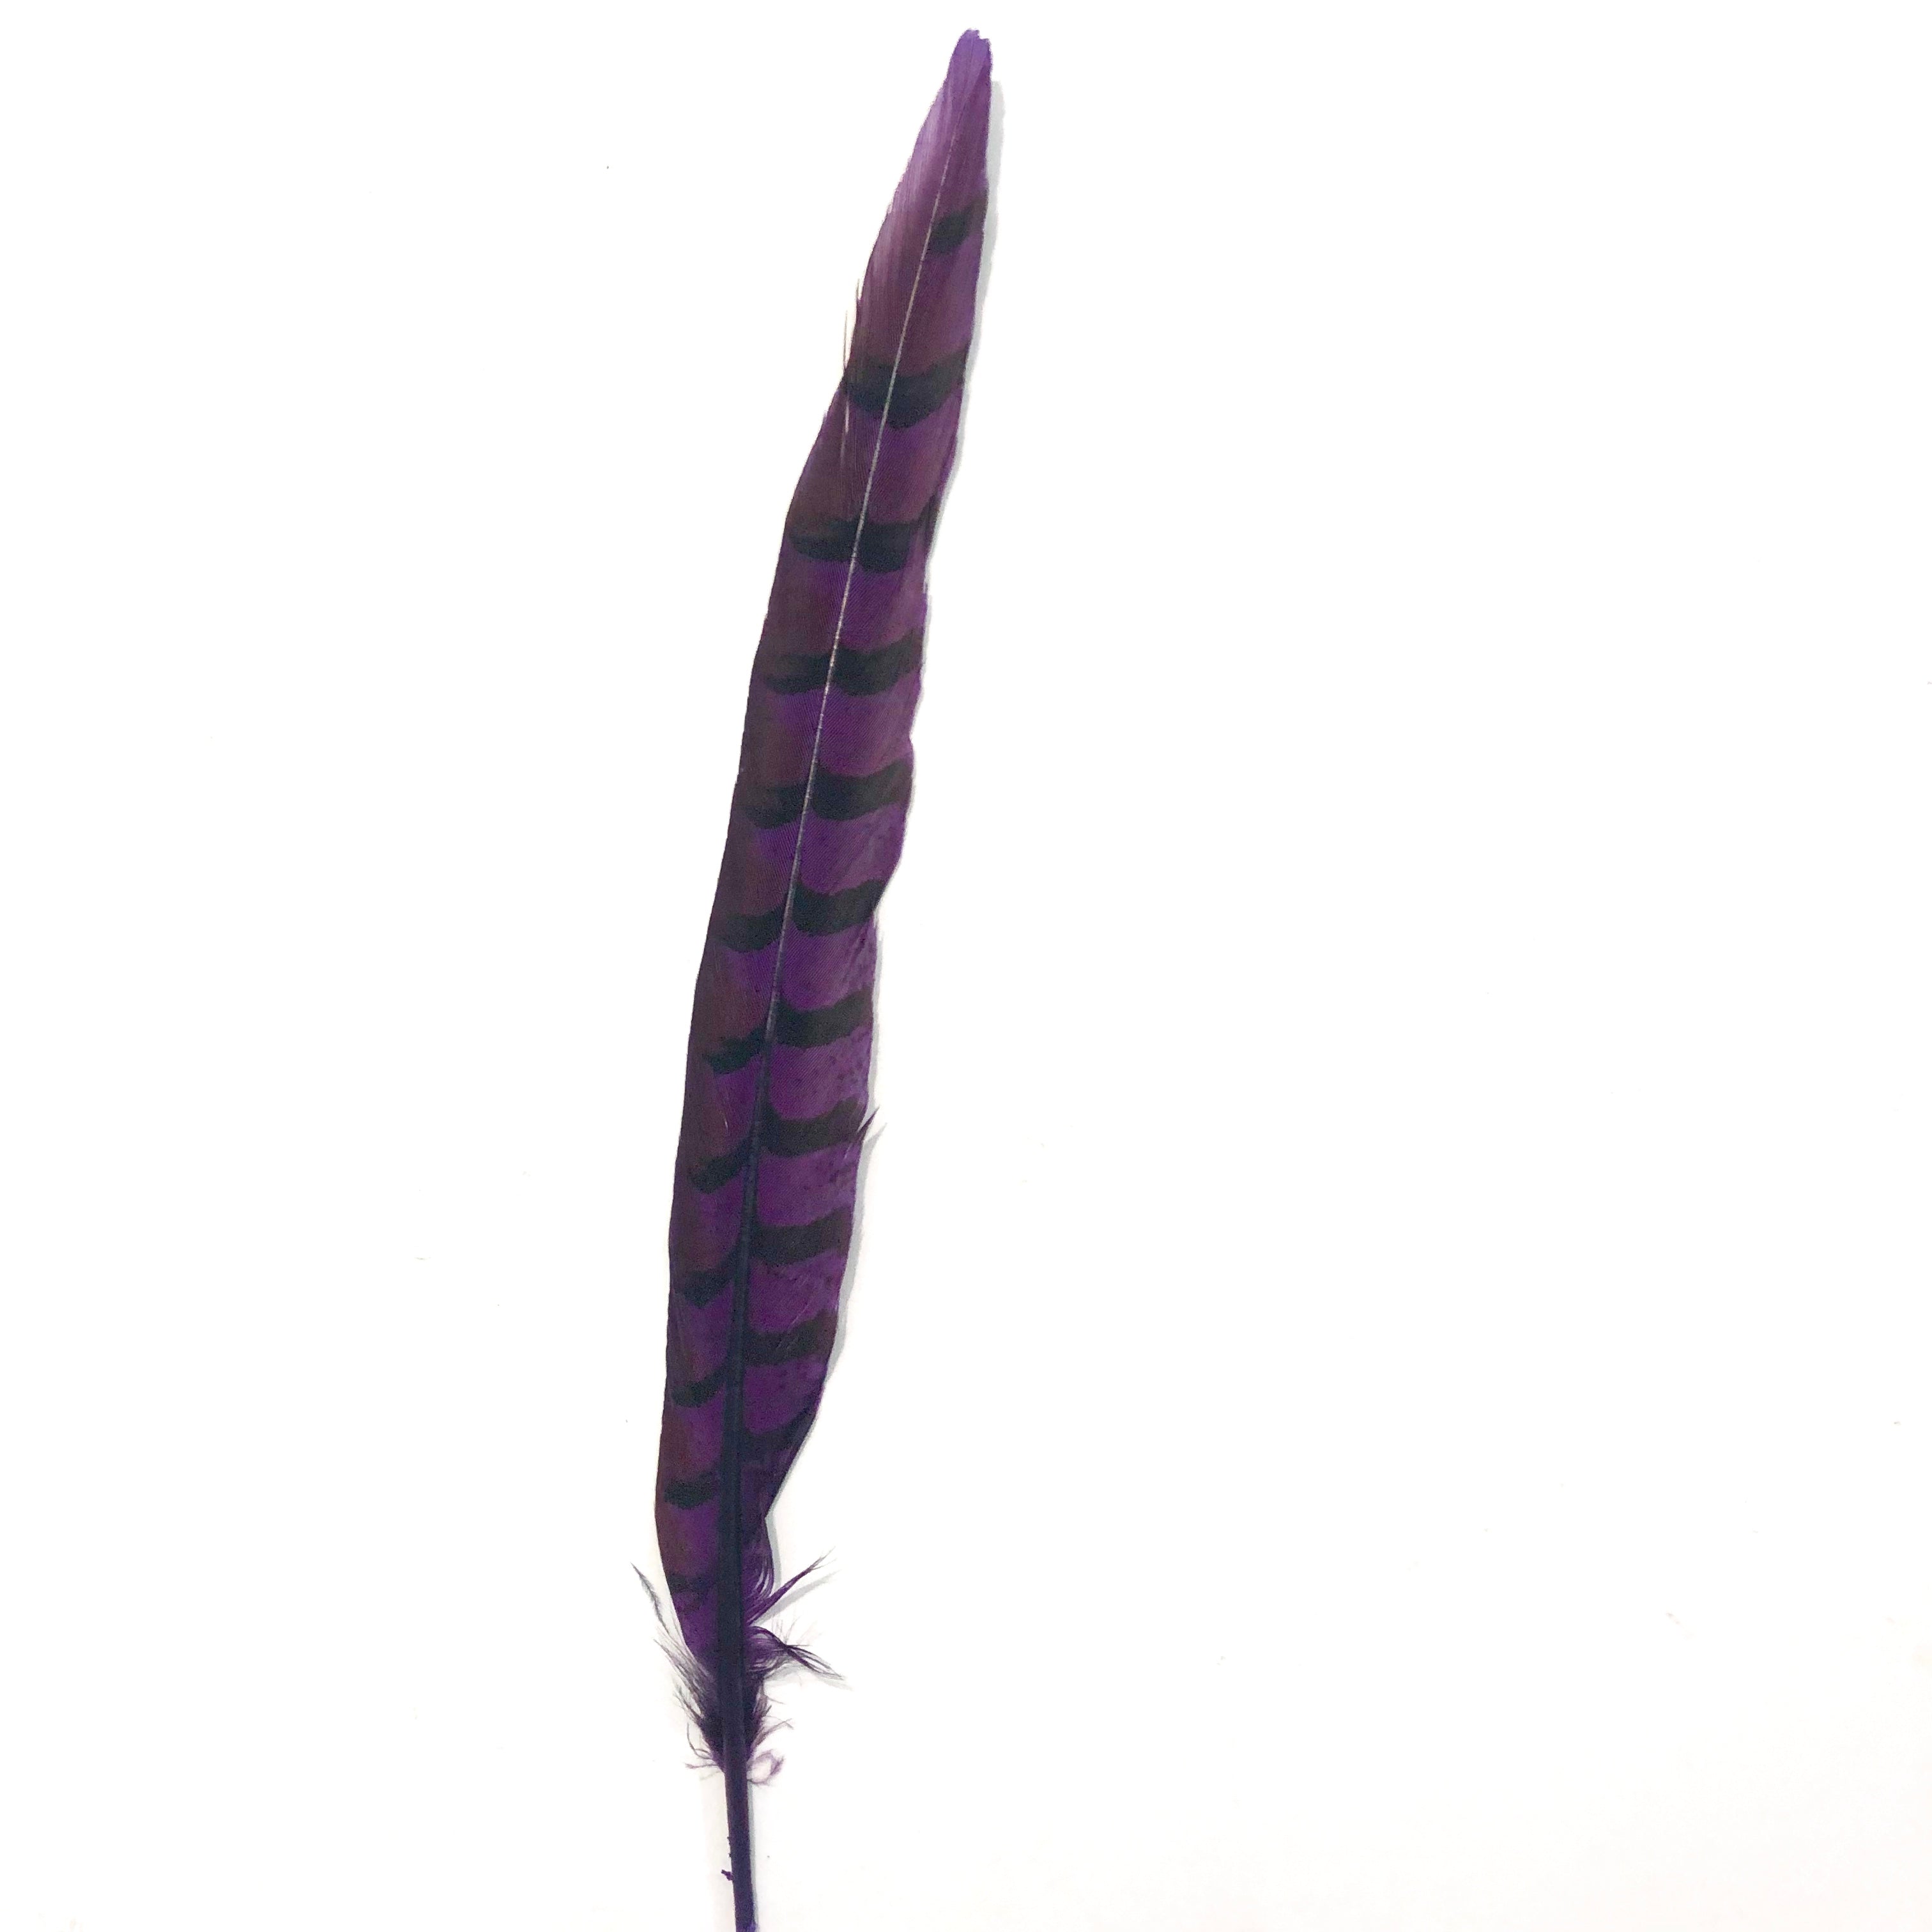 12" to 14" Reeves Pheasant Tail Feather - Eggplant